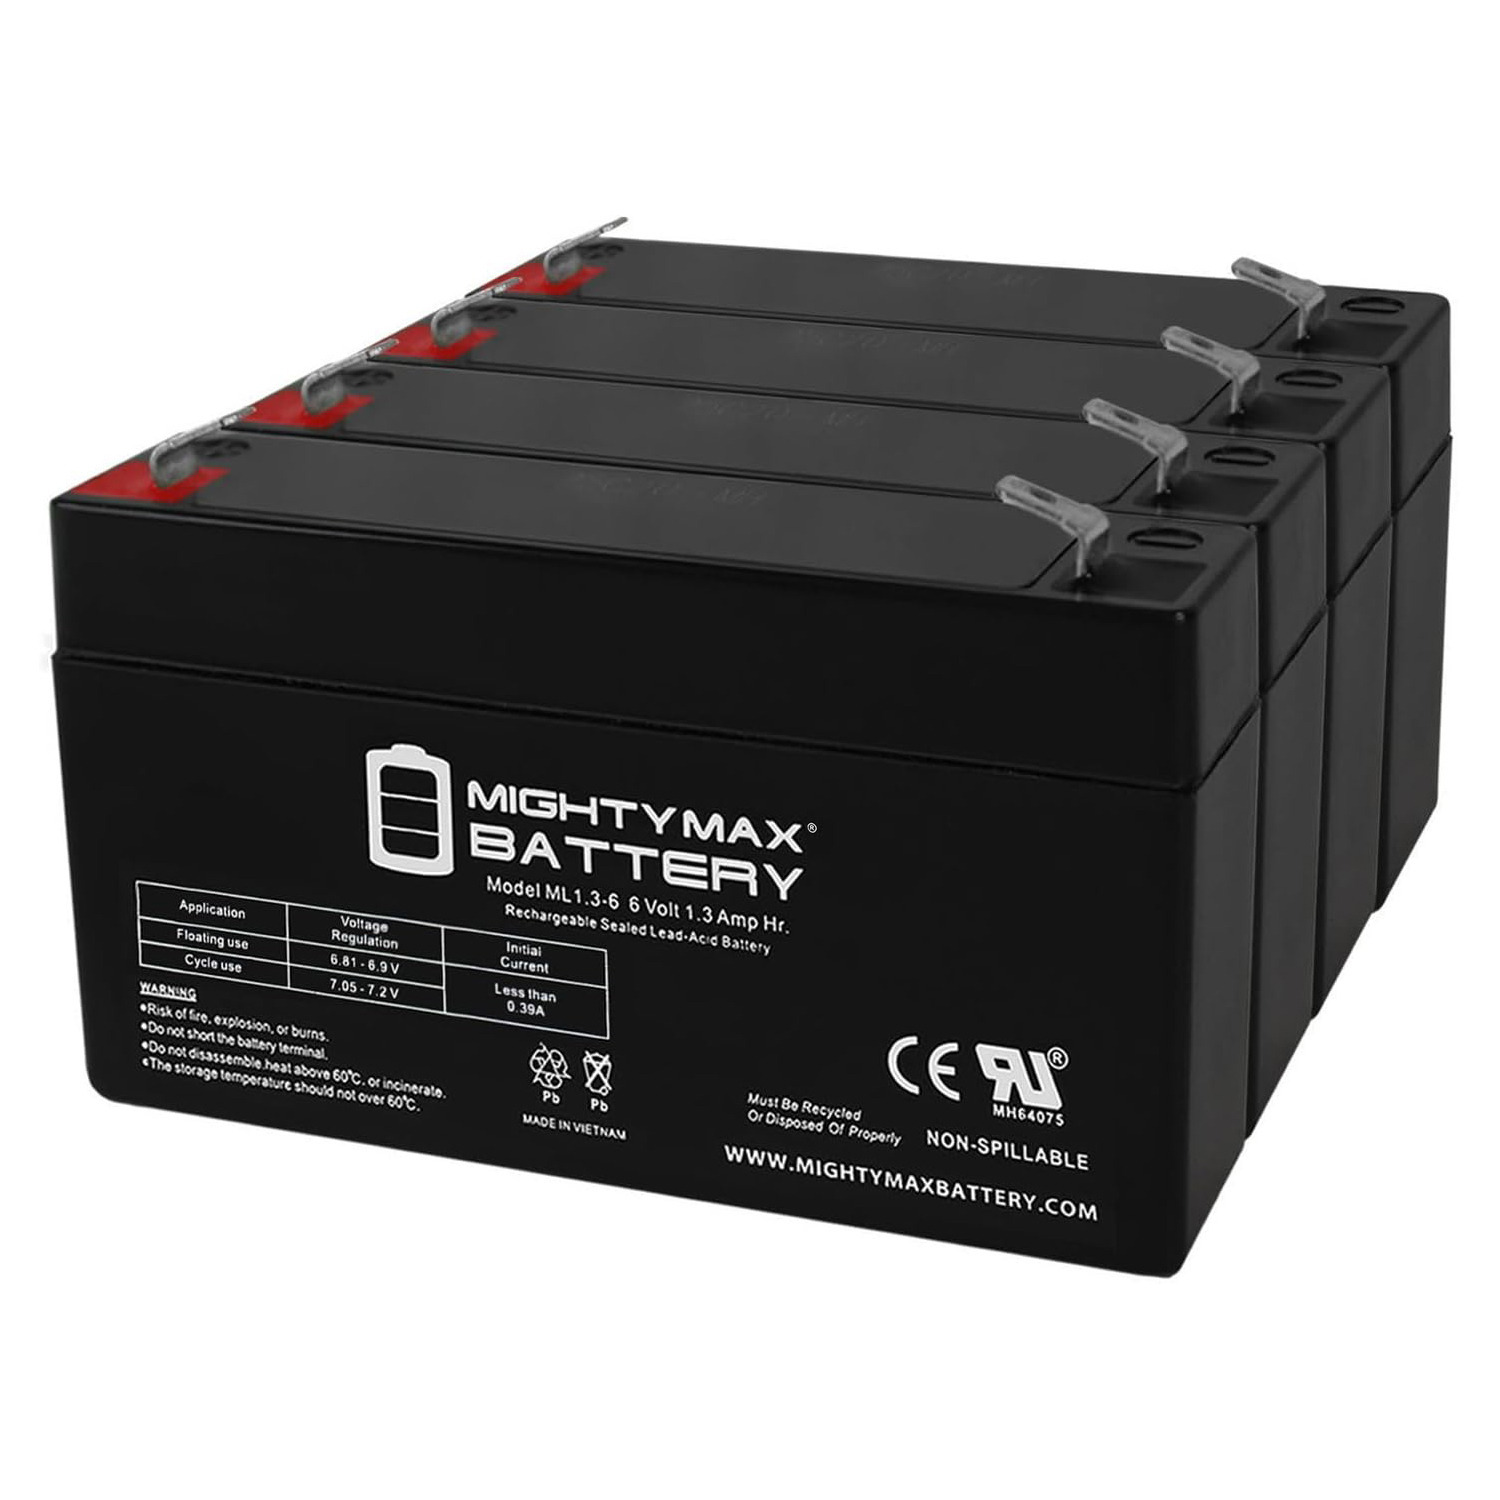 6V 1.3Ah SLA Replacement Battery for Johnson Control JC612 - 4 Pack